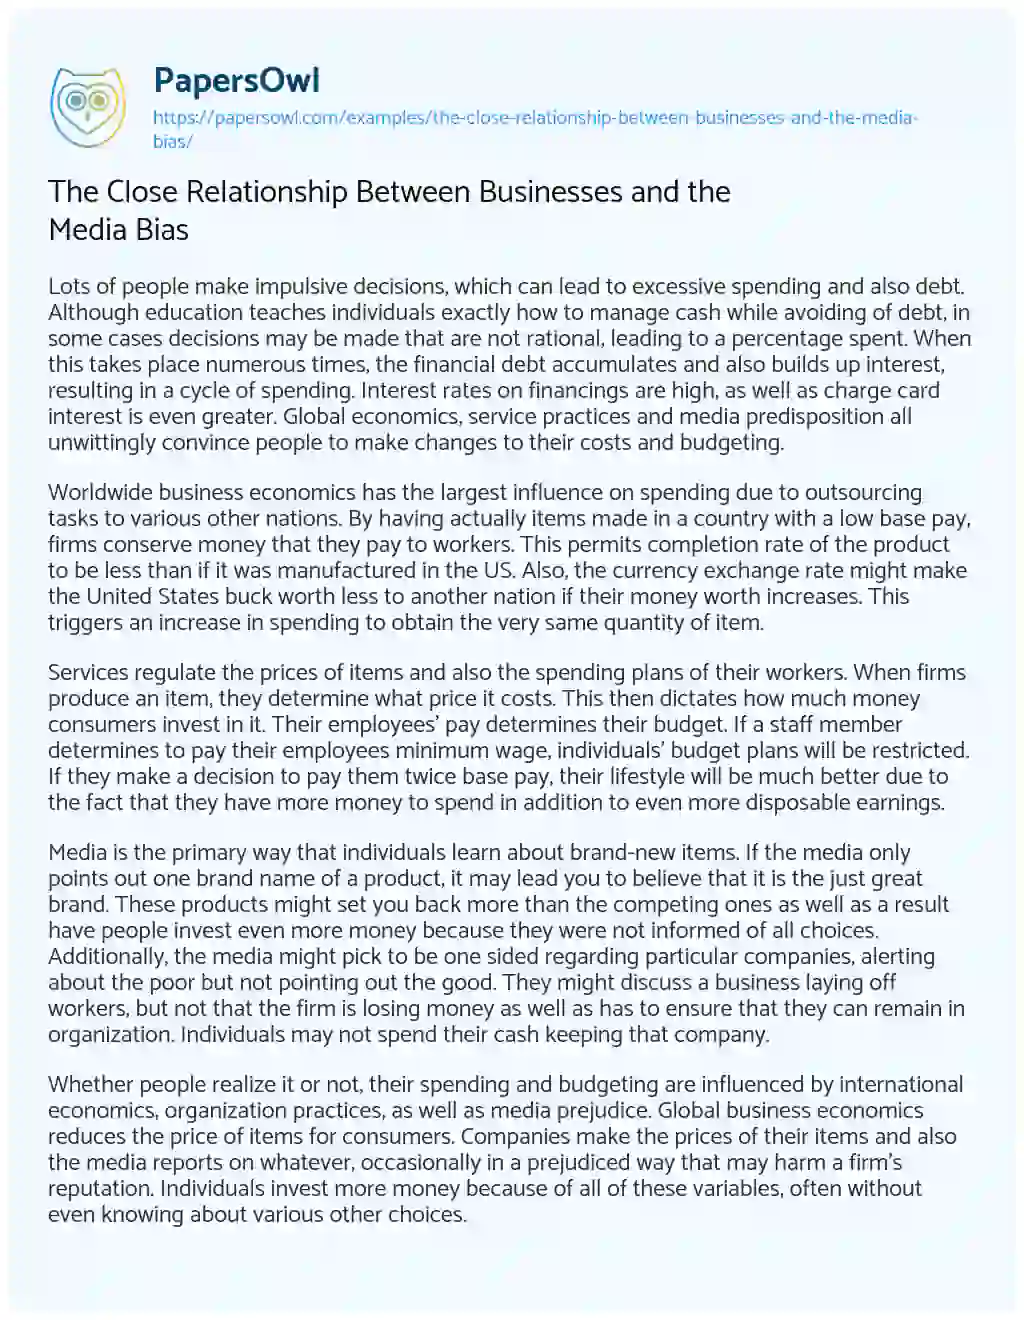 Essay on The Close Relationship between Businesses and the Media Bias